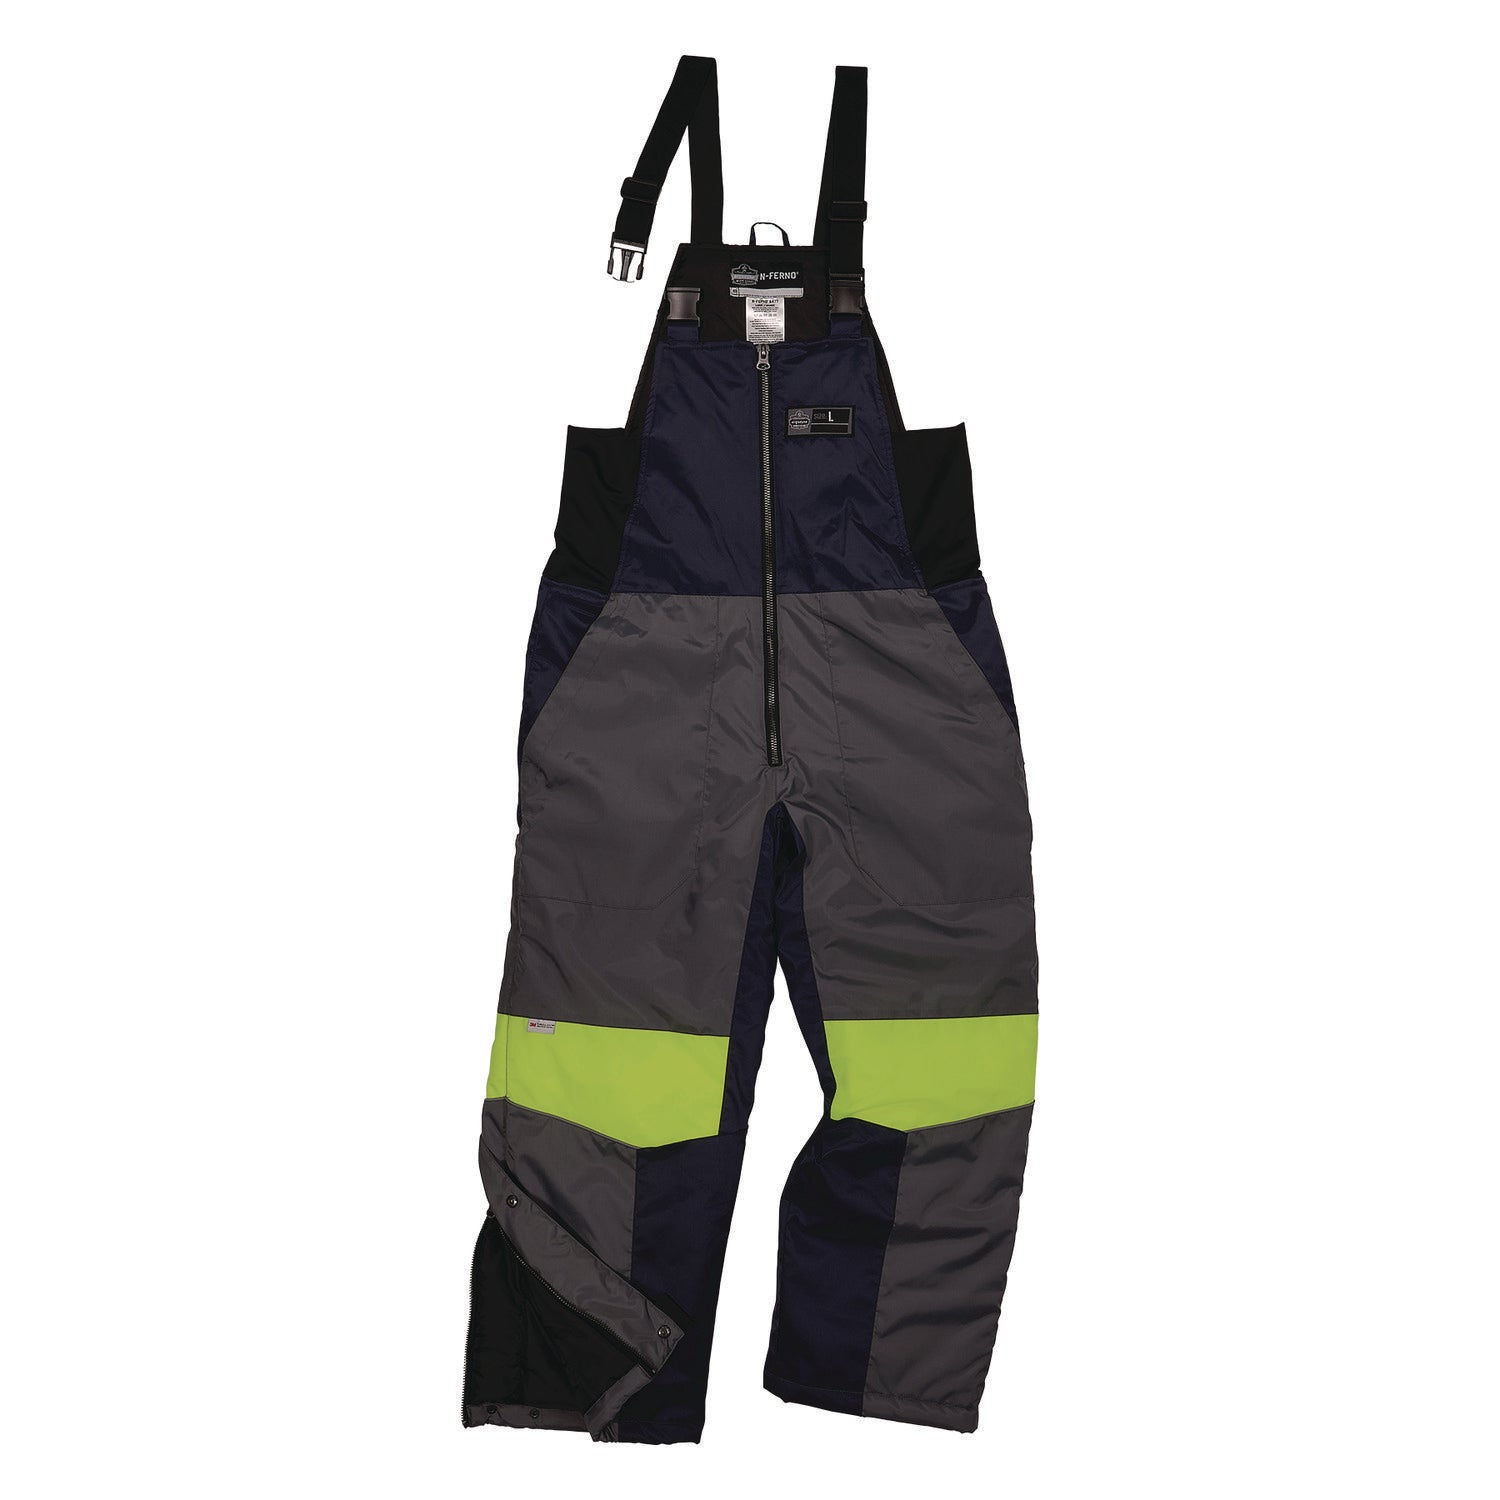 n-ferno-6477-insulated-cooler-bib-overall-x-small-navy-ships-in-1-3-business-days_ego41261 - 1